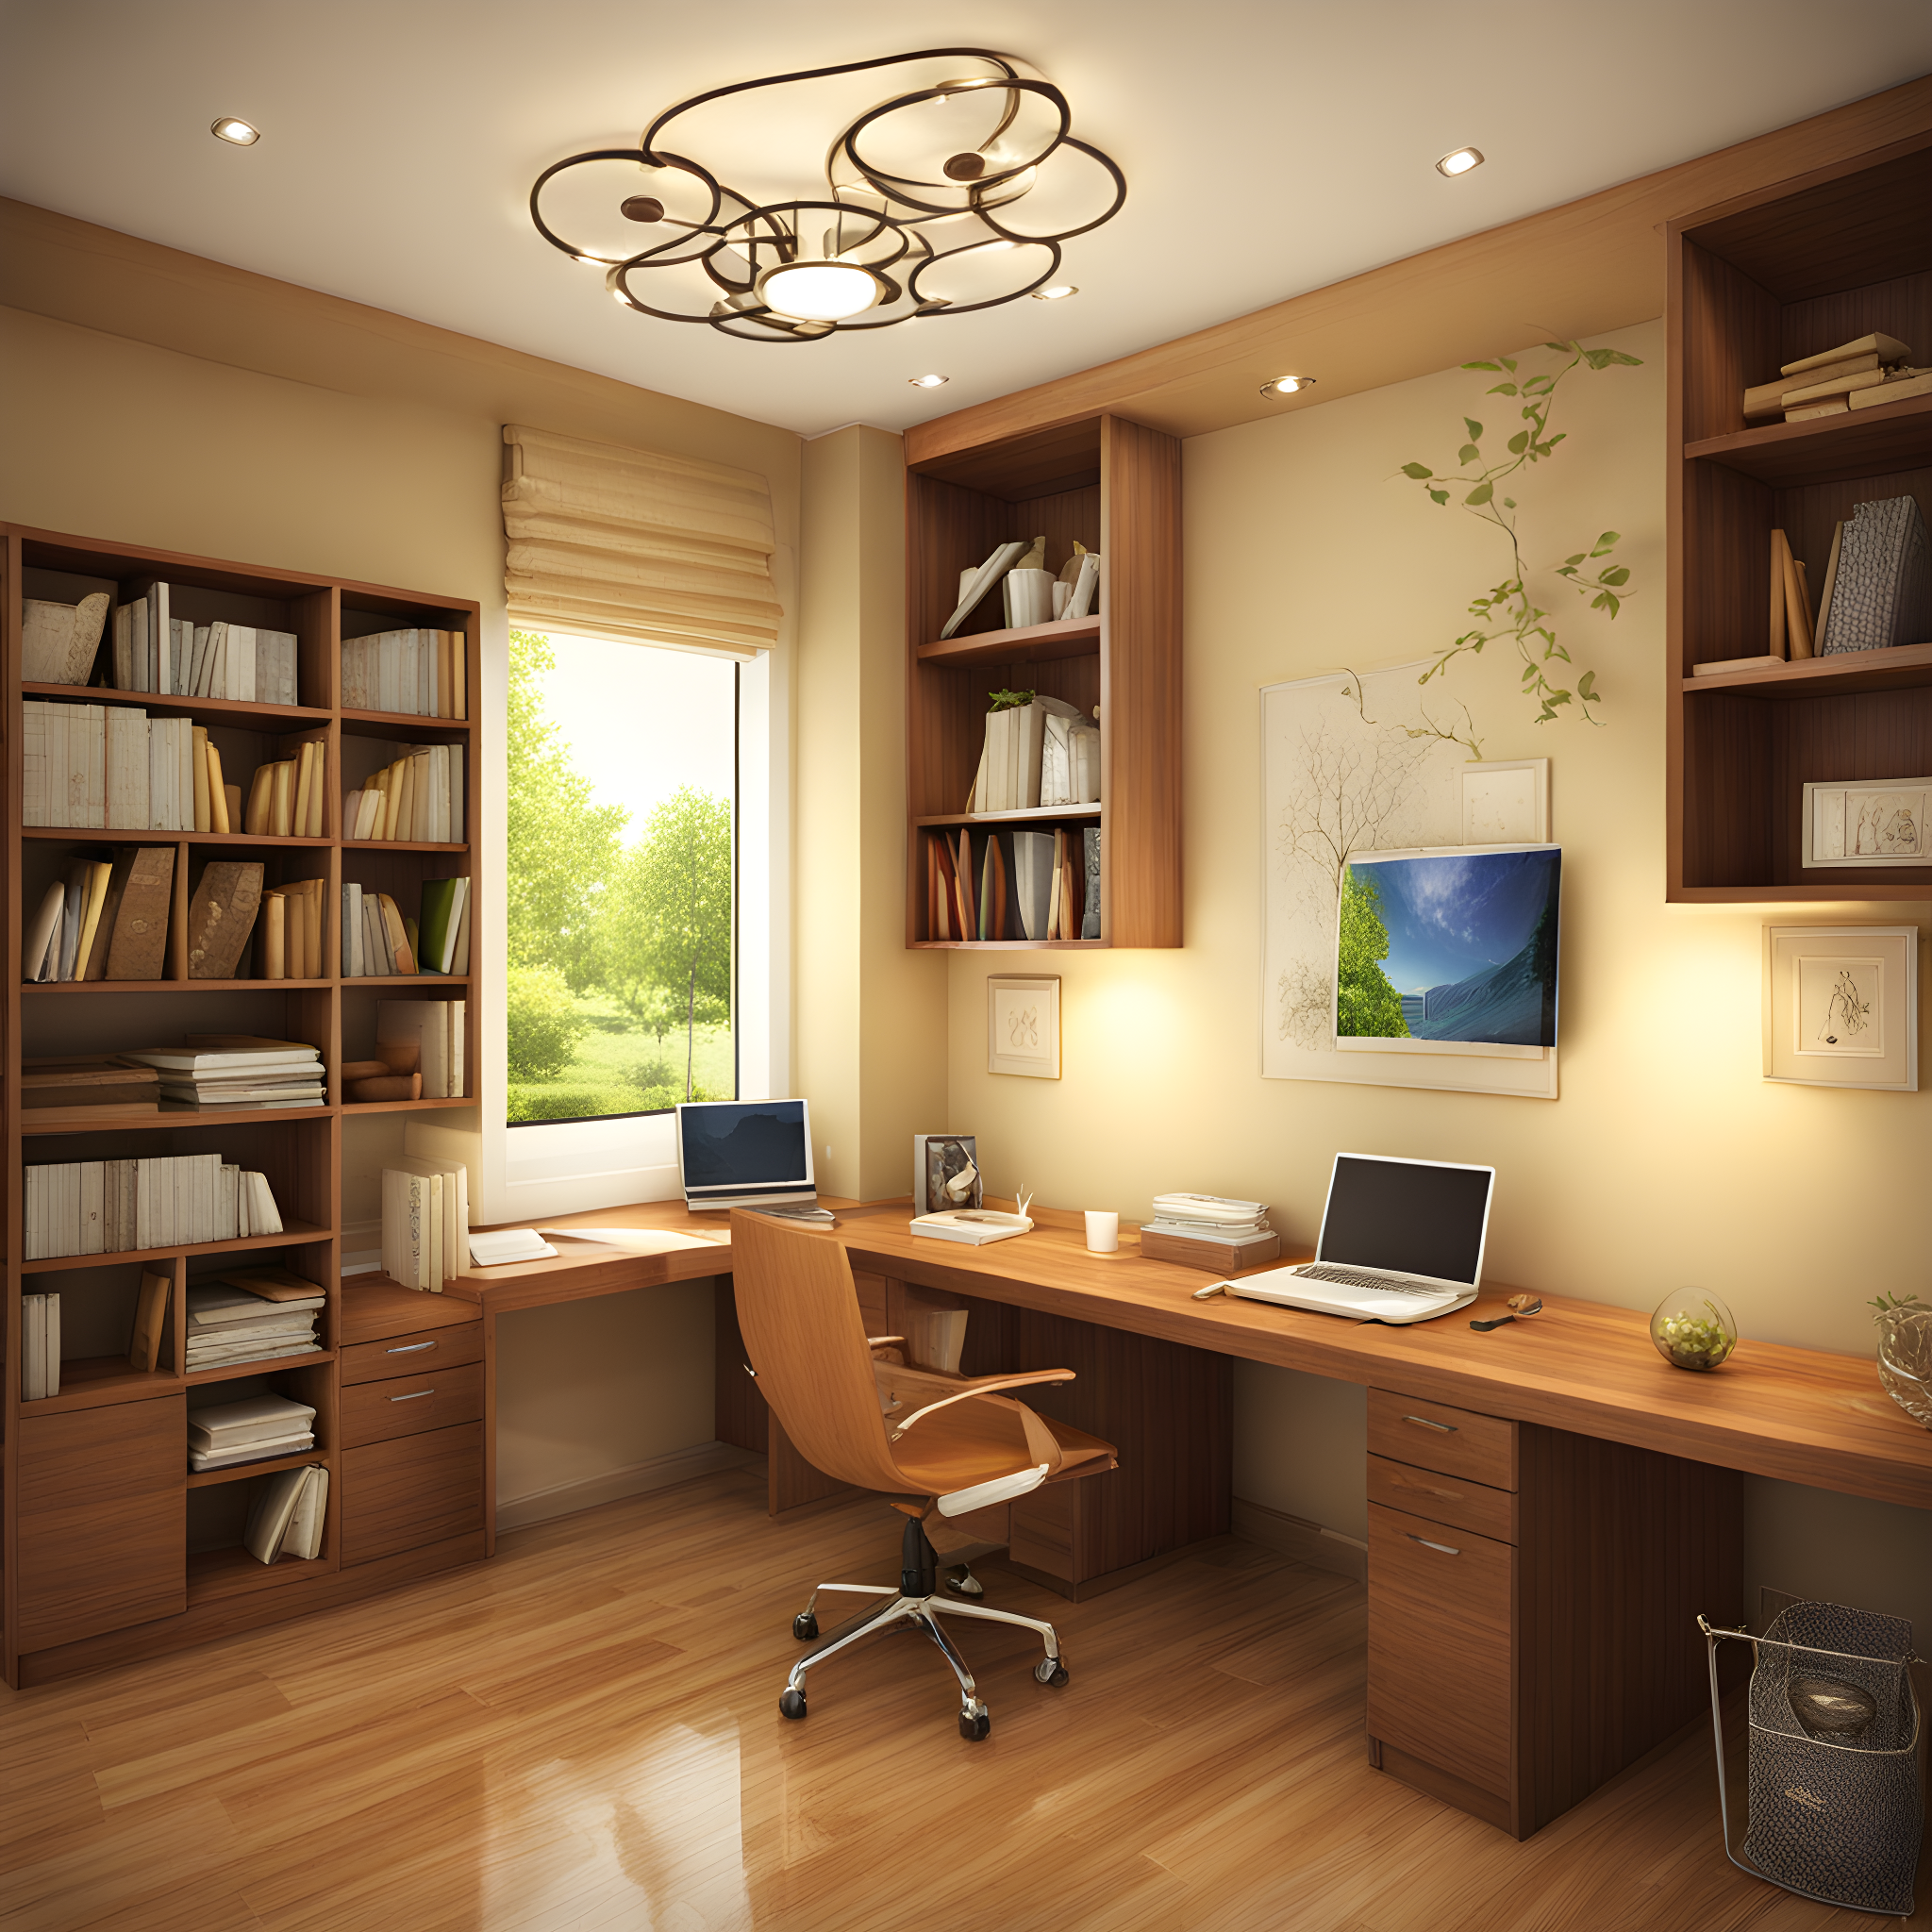 Study Room Vastu Tips to Improve Your Concentration